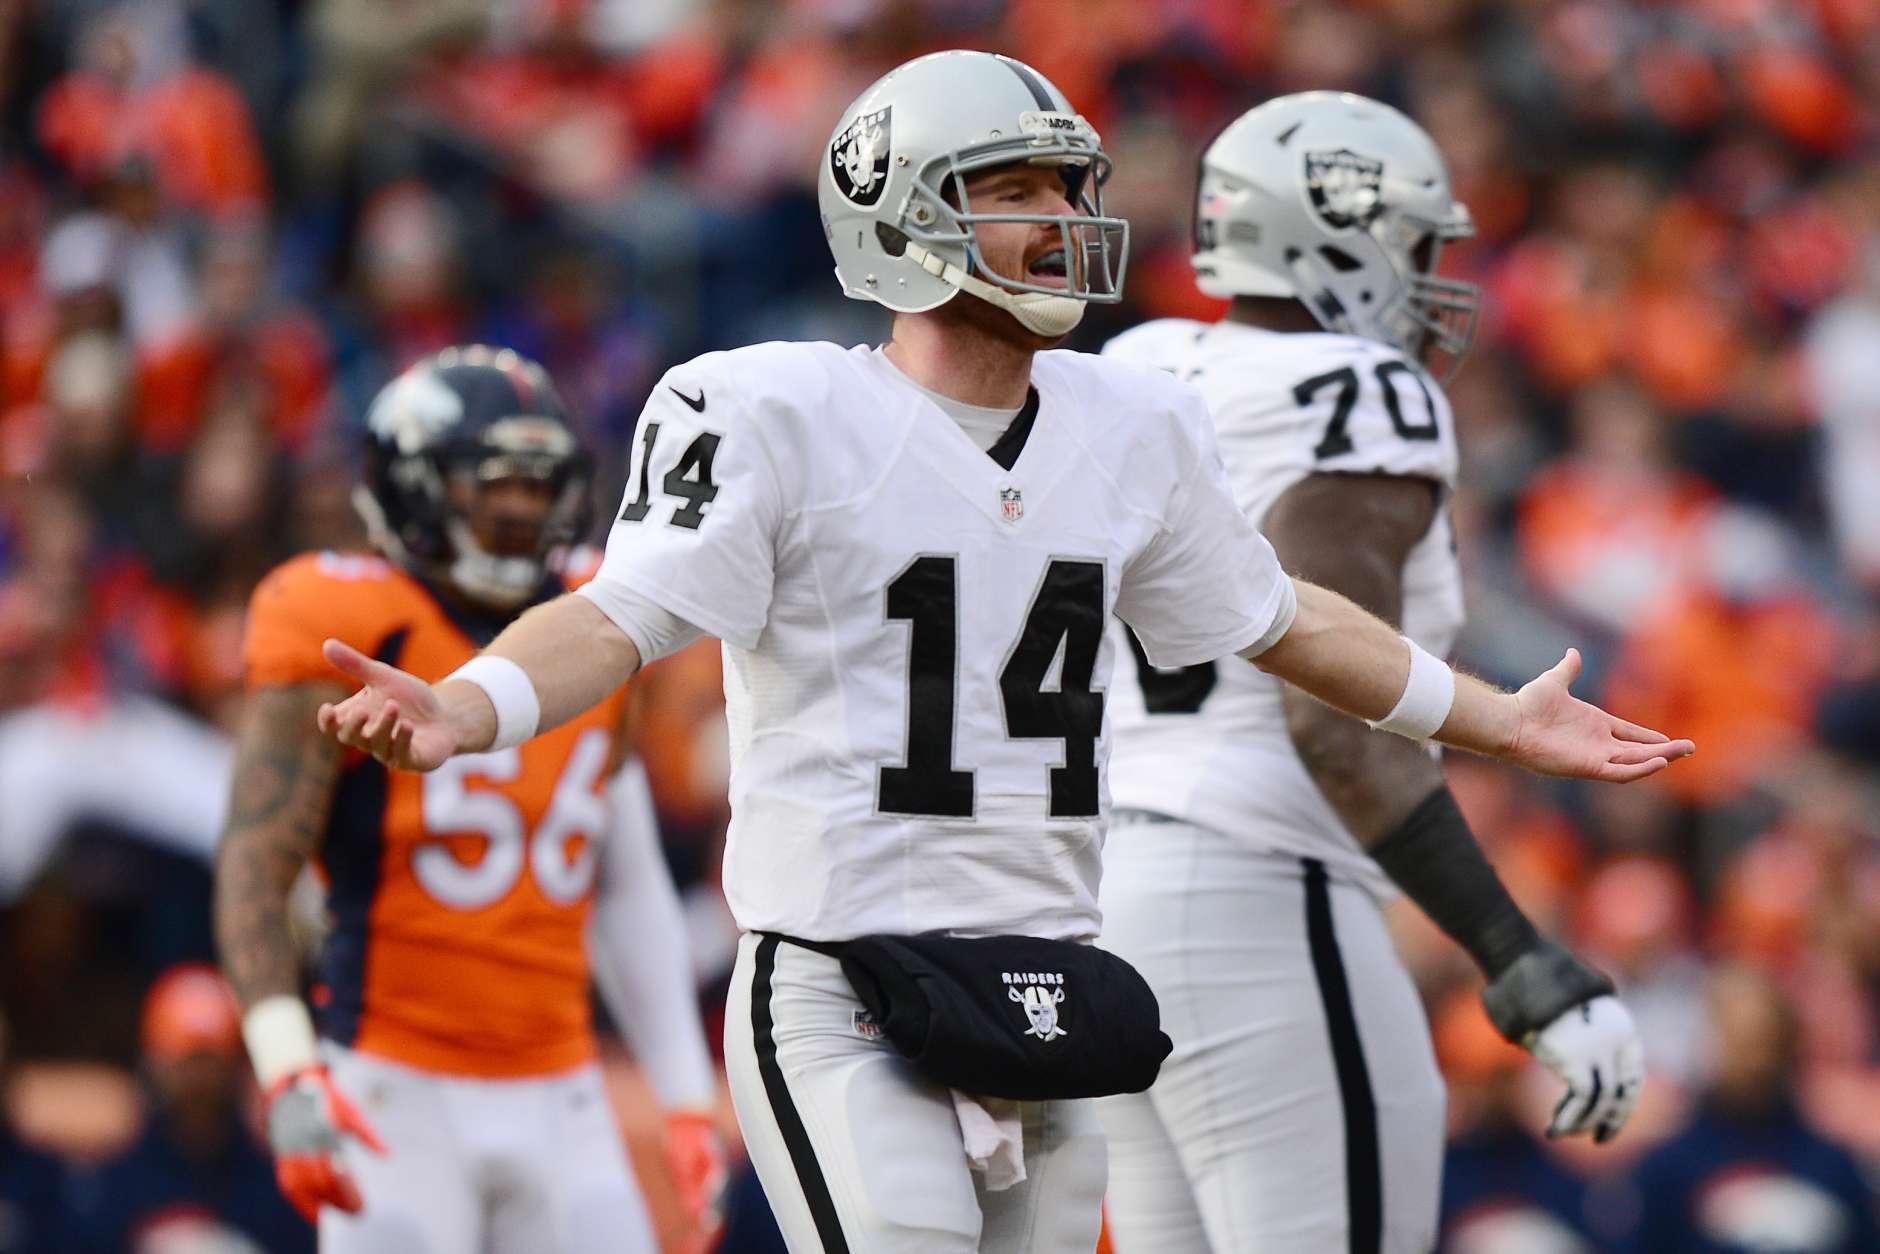 DENVER, CO - JANUARY 1:  Quarterback Matt McGloin #14 of the Oakland Raiders with his arms outstretched in the first quarter of the game against the Denver Broncos at Sports Authority Field at Mile High on January 1, 2017 in Denver, Colorado. (Photo by Dustin Bradford/Getty Images)